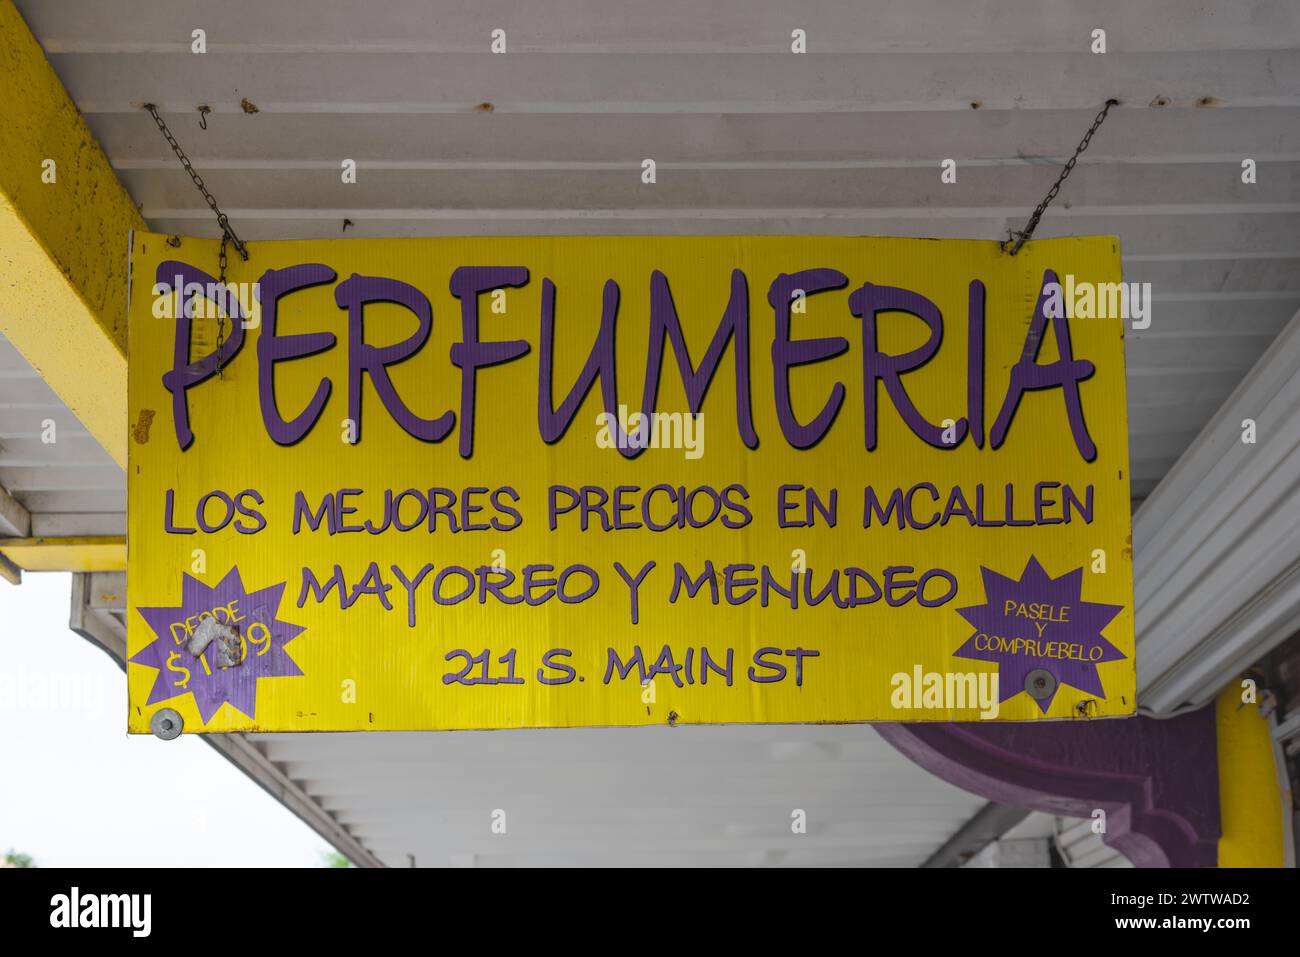 Yellow and purple hanging cardboard sign for Perfumeria, wholesale and retail store, McAllen, Hidalgo County, Texas, USA. Stock Photo